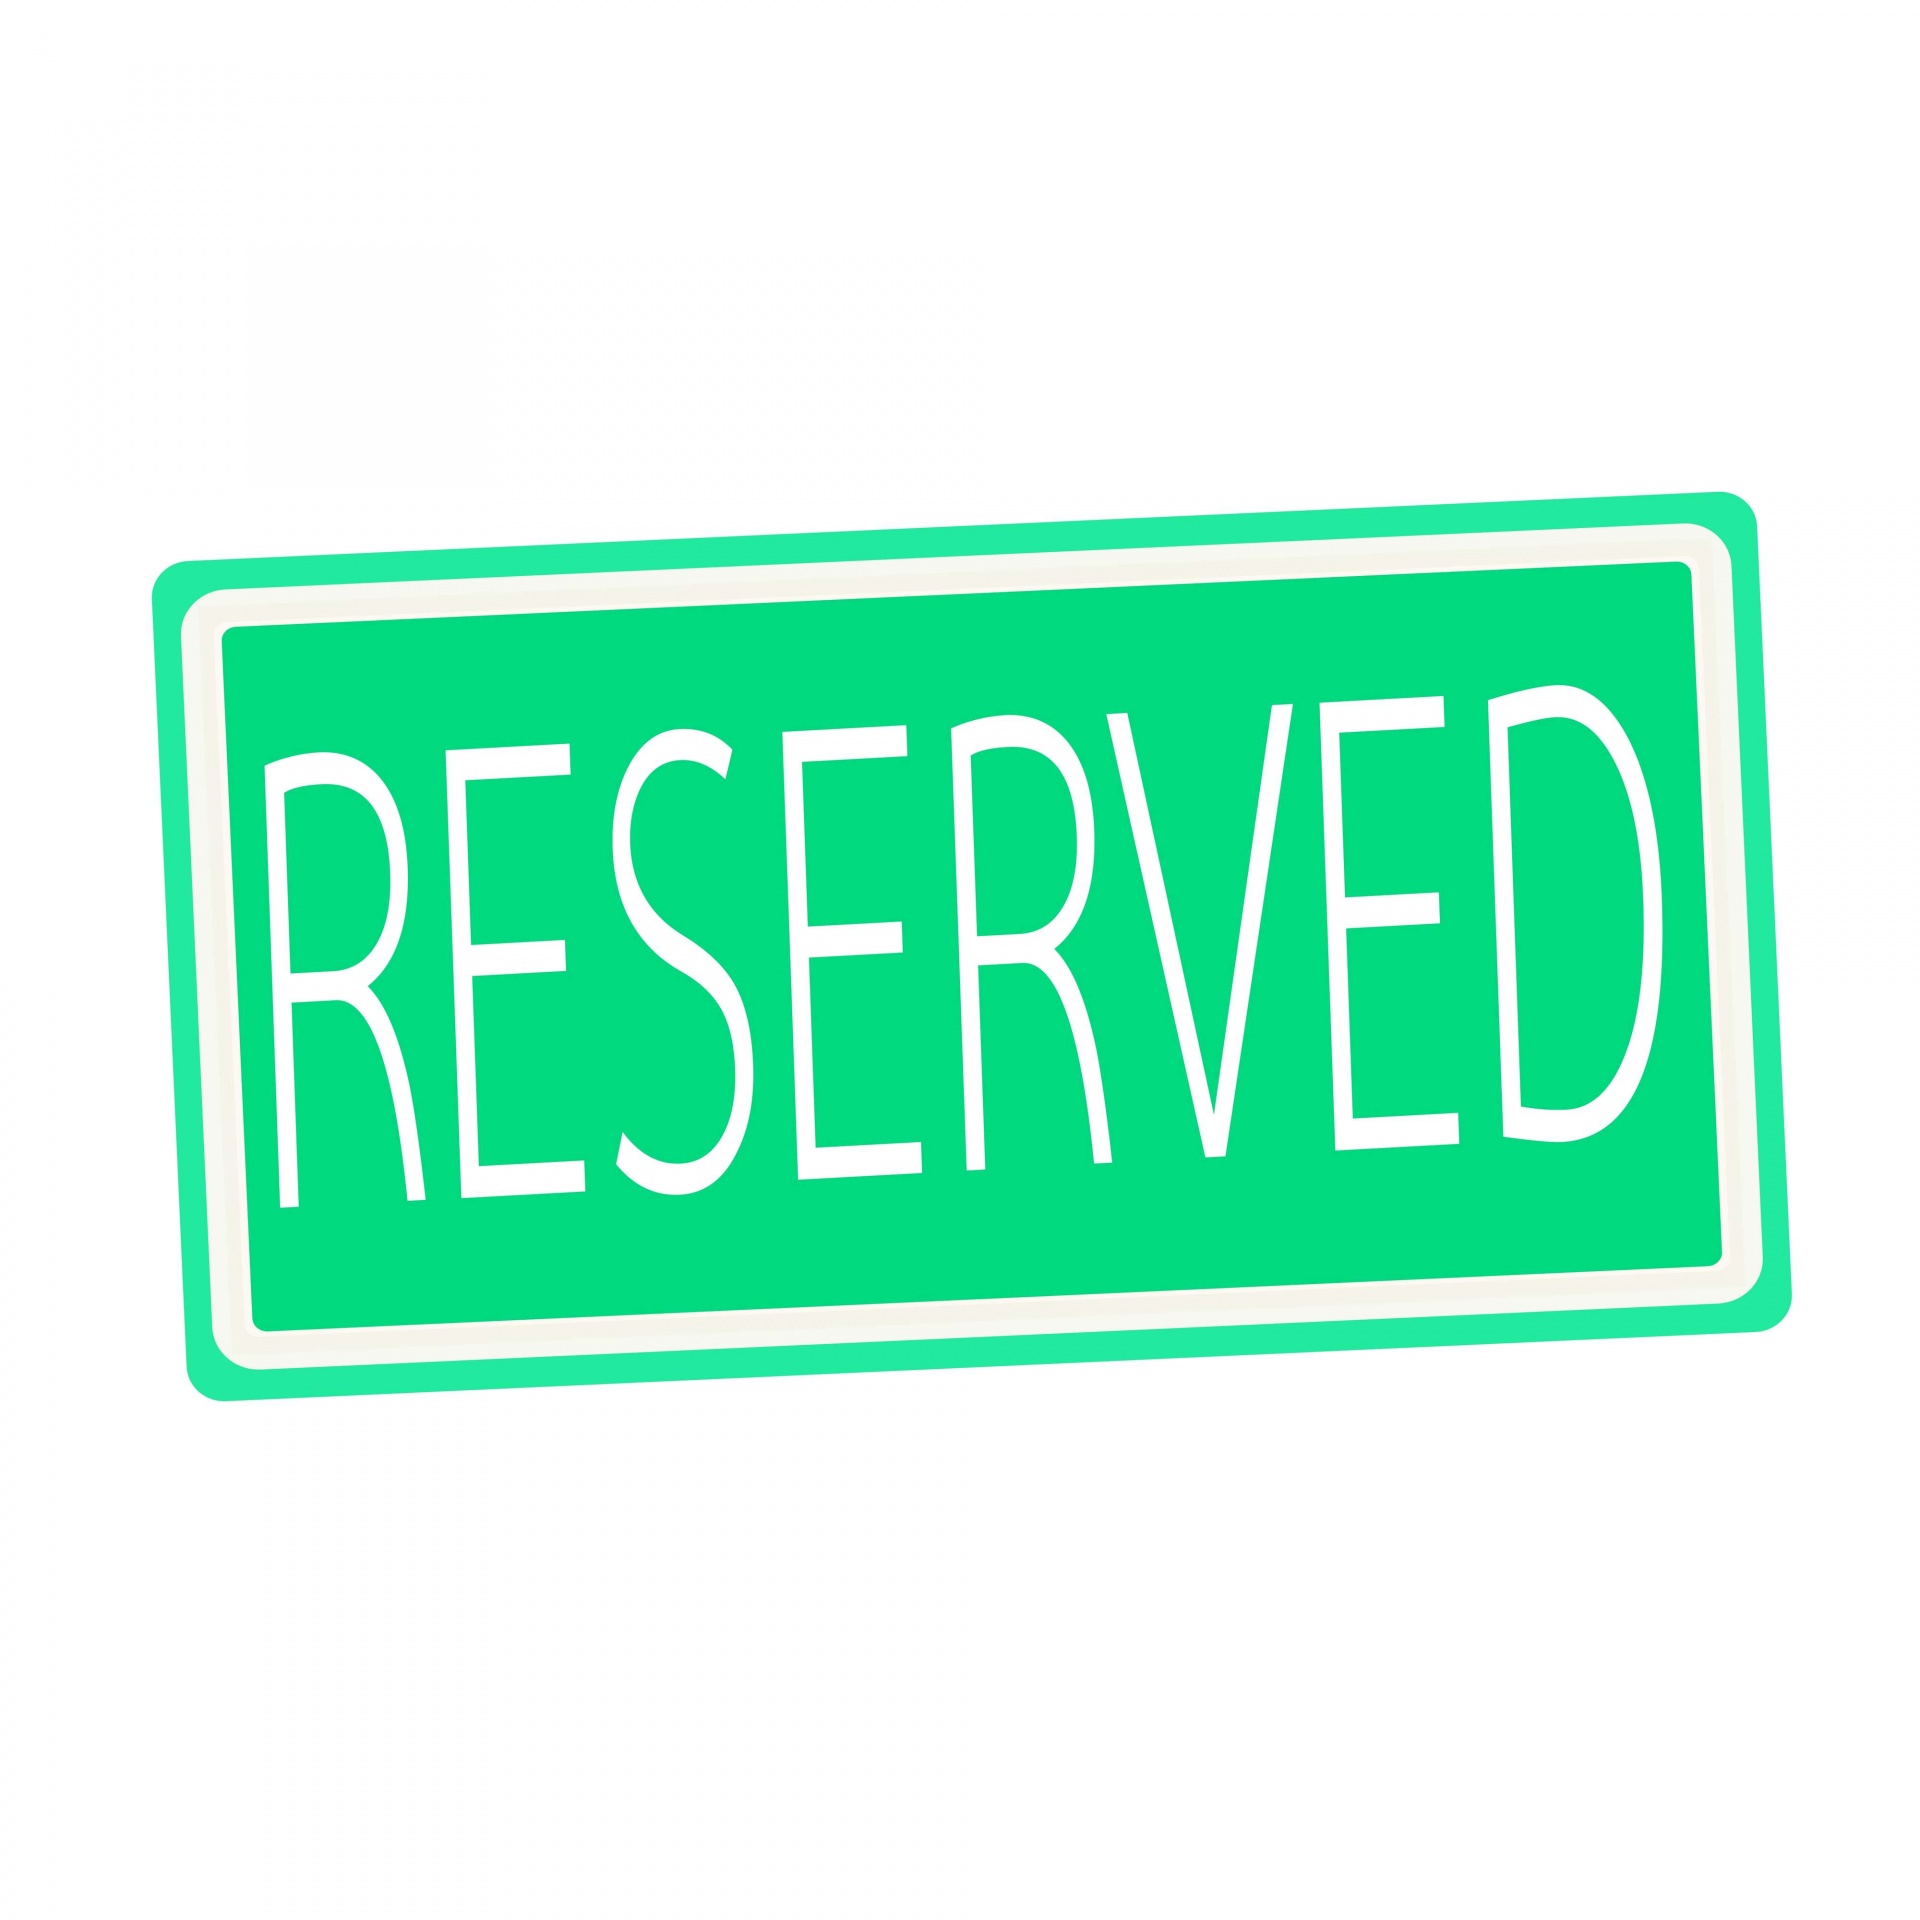 Reserved White Stamp Text On Green